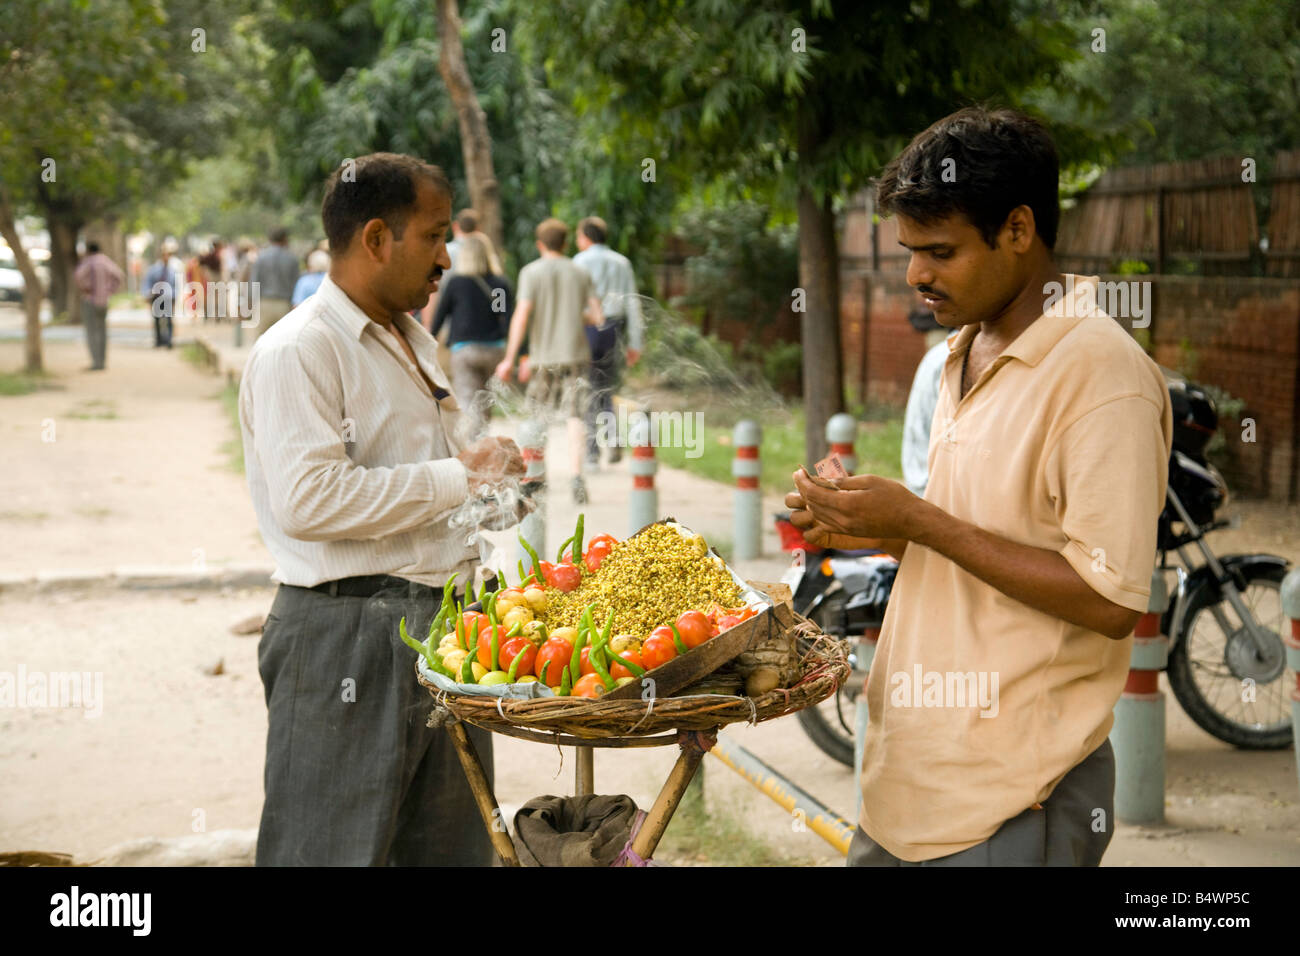 A street trader selling vegetables to a passer by, New Delhi, India Stock Photo